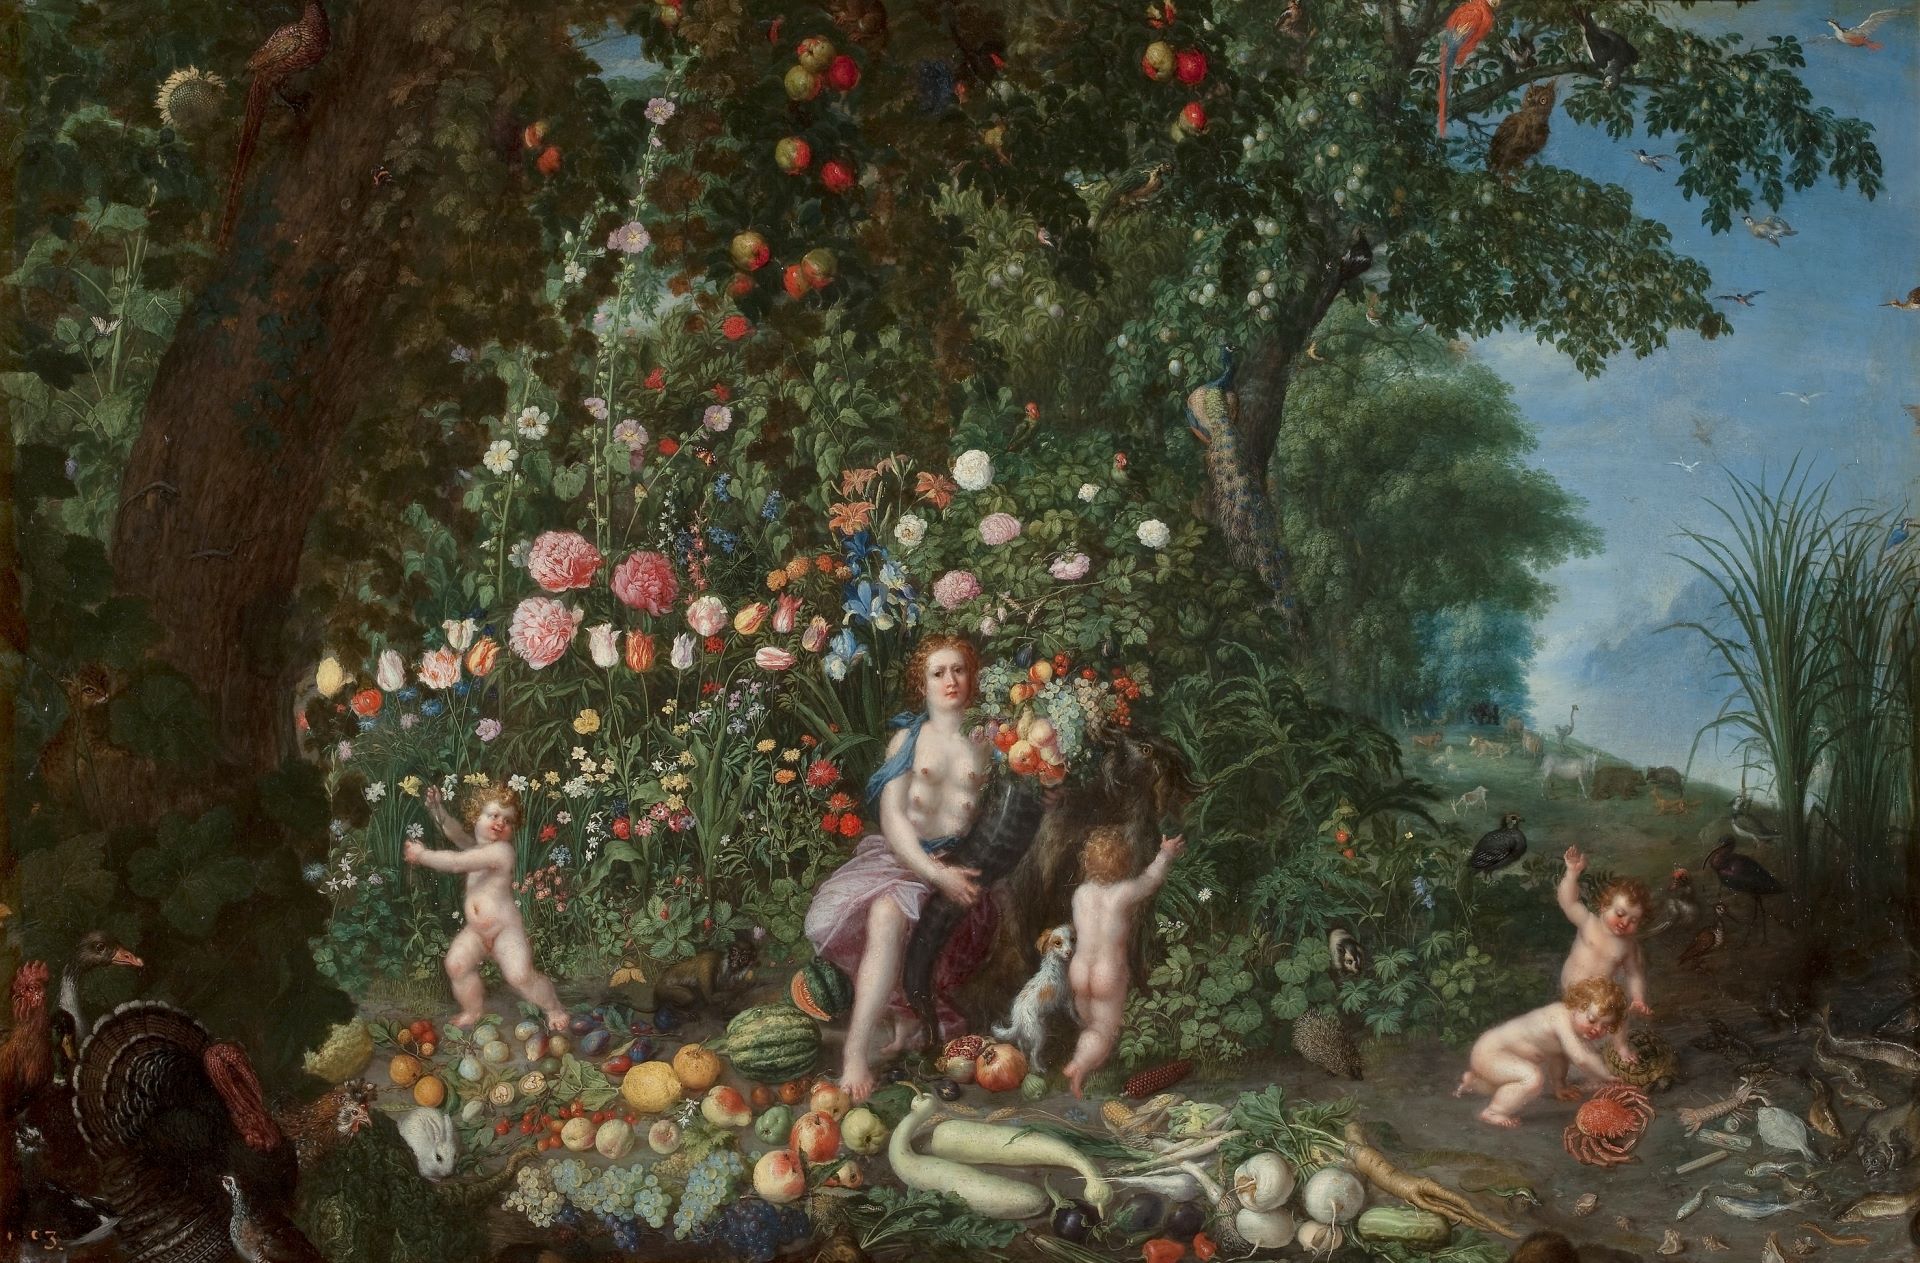 Painting "Abundance" by Jan Brueghel the Younger (ca. 1625). From Museo del Prado